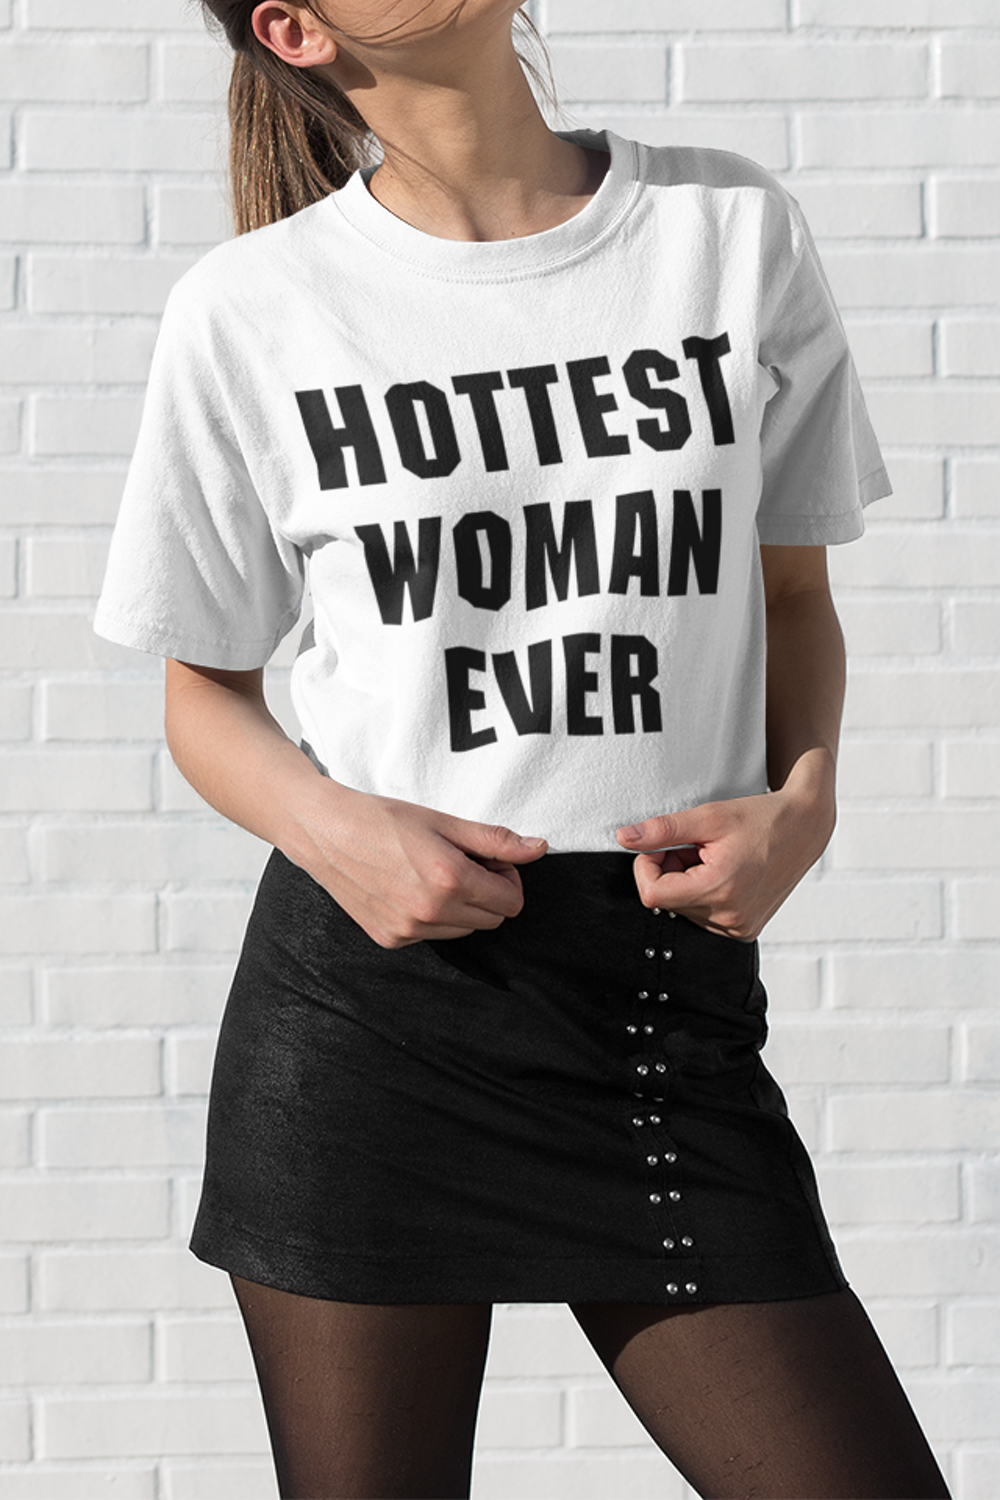 The Hottest Woman Ever Women's Casual T-Shirt